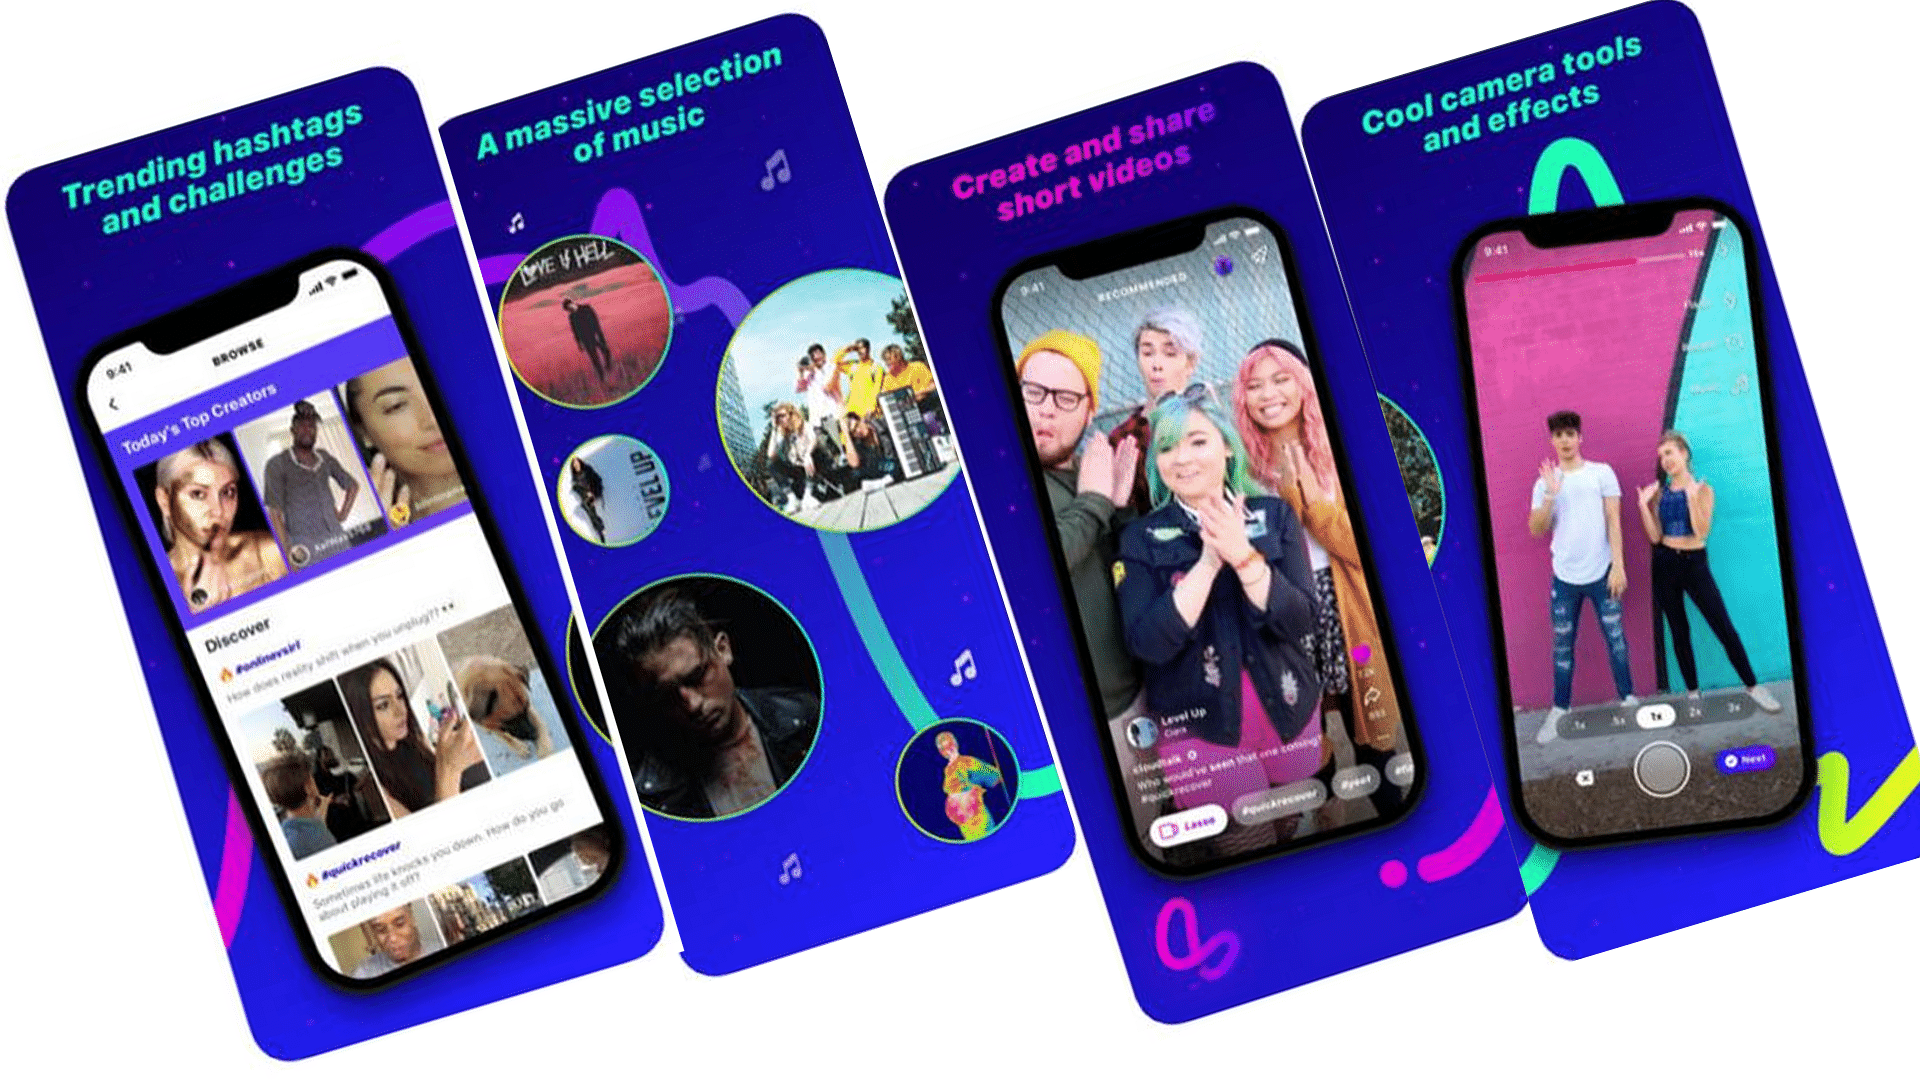 Facebook has silently launched a music video app that is a TikTok competitor.&nbsp;